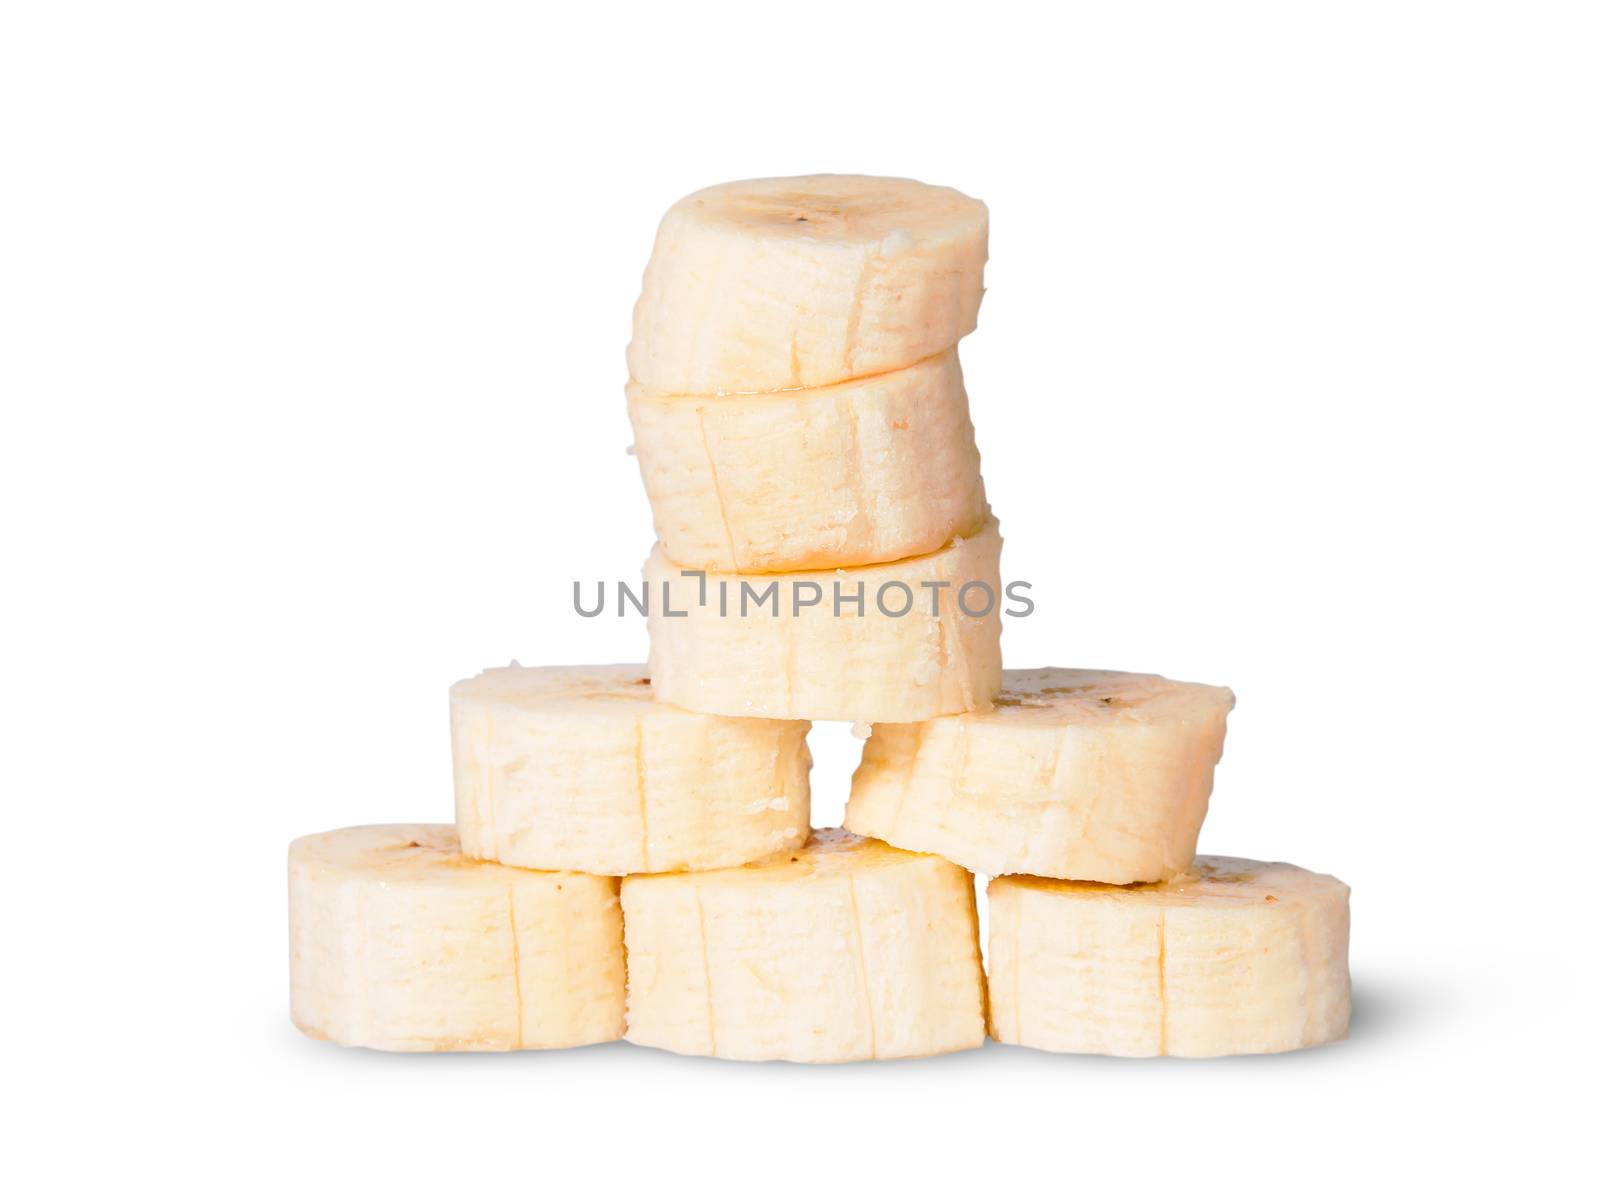 Stack Of Banana Slices Isolated On White Background